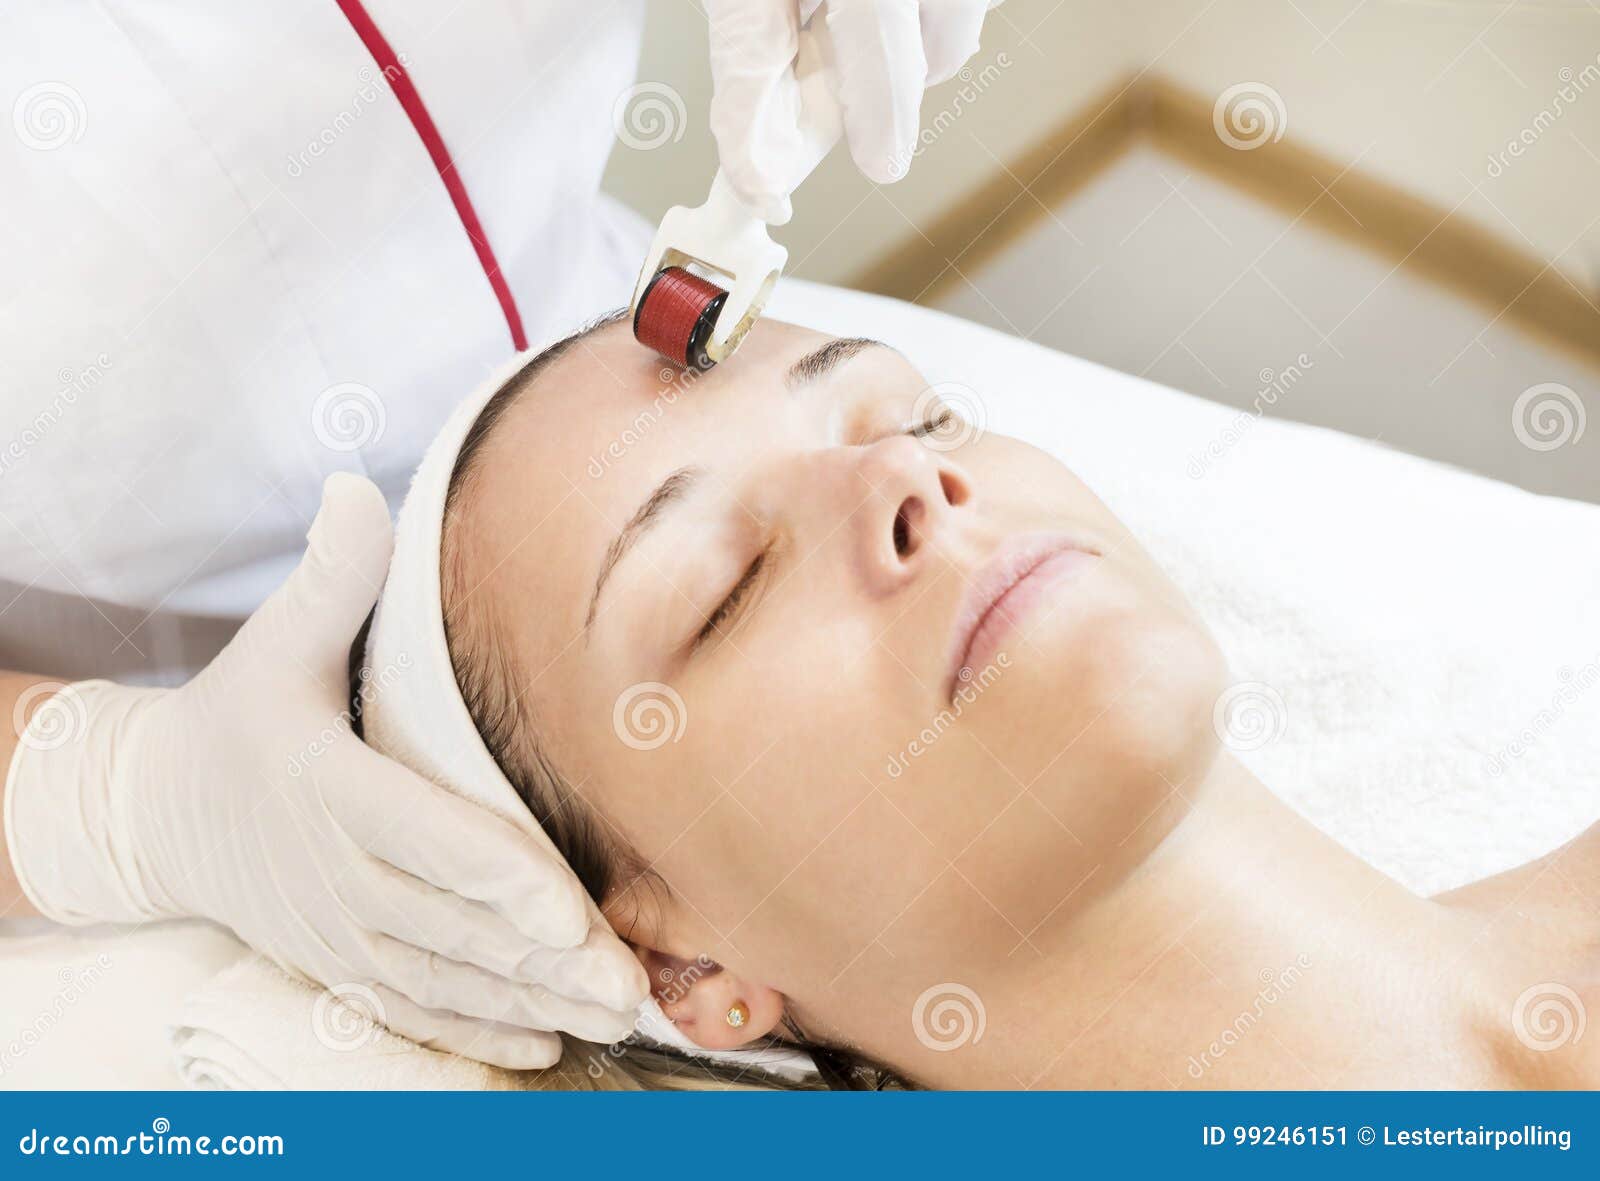 the woman undergoes the procedure of medical micro needle therapy